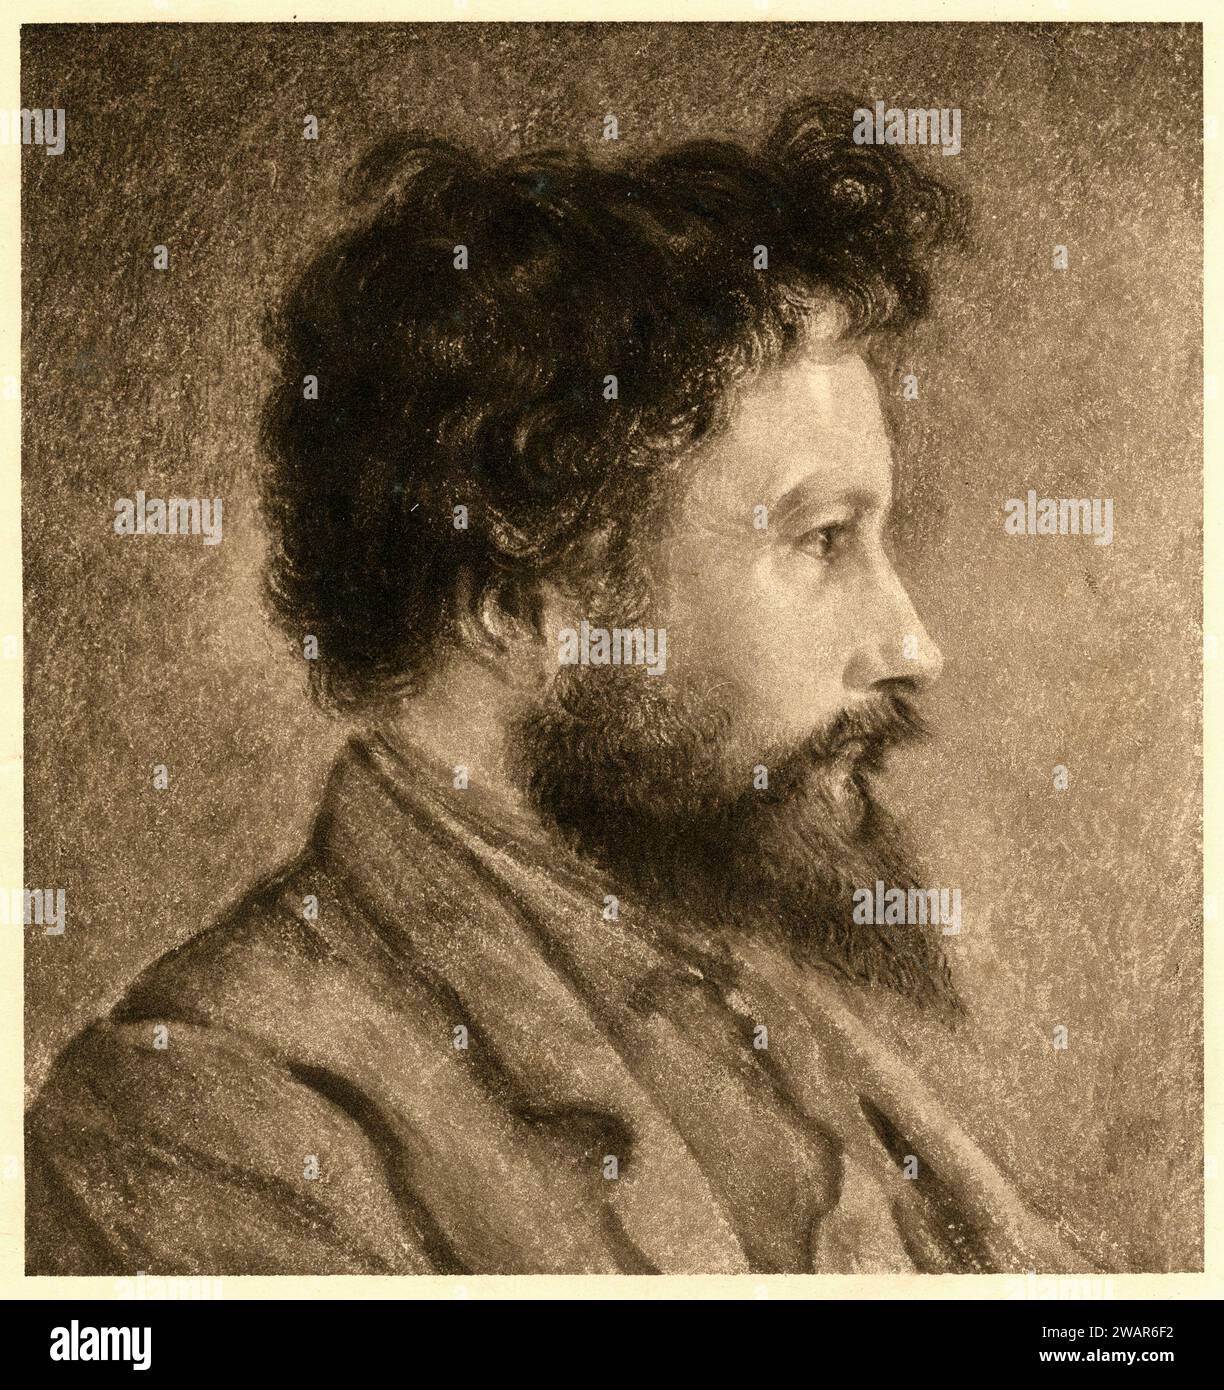 Portrait of William Morris (1834-1896), British artist, writer and socialist and a key figure in the British Arts and Crafts Movement. Portrait from a Drawing by Charles Fairfax Murray from a photograph c1870. Vintage Illustration or Engraving. Stock Photo